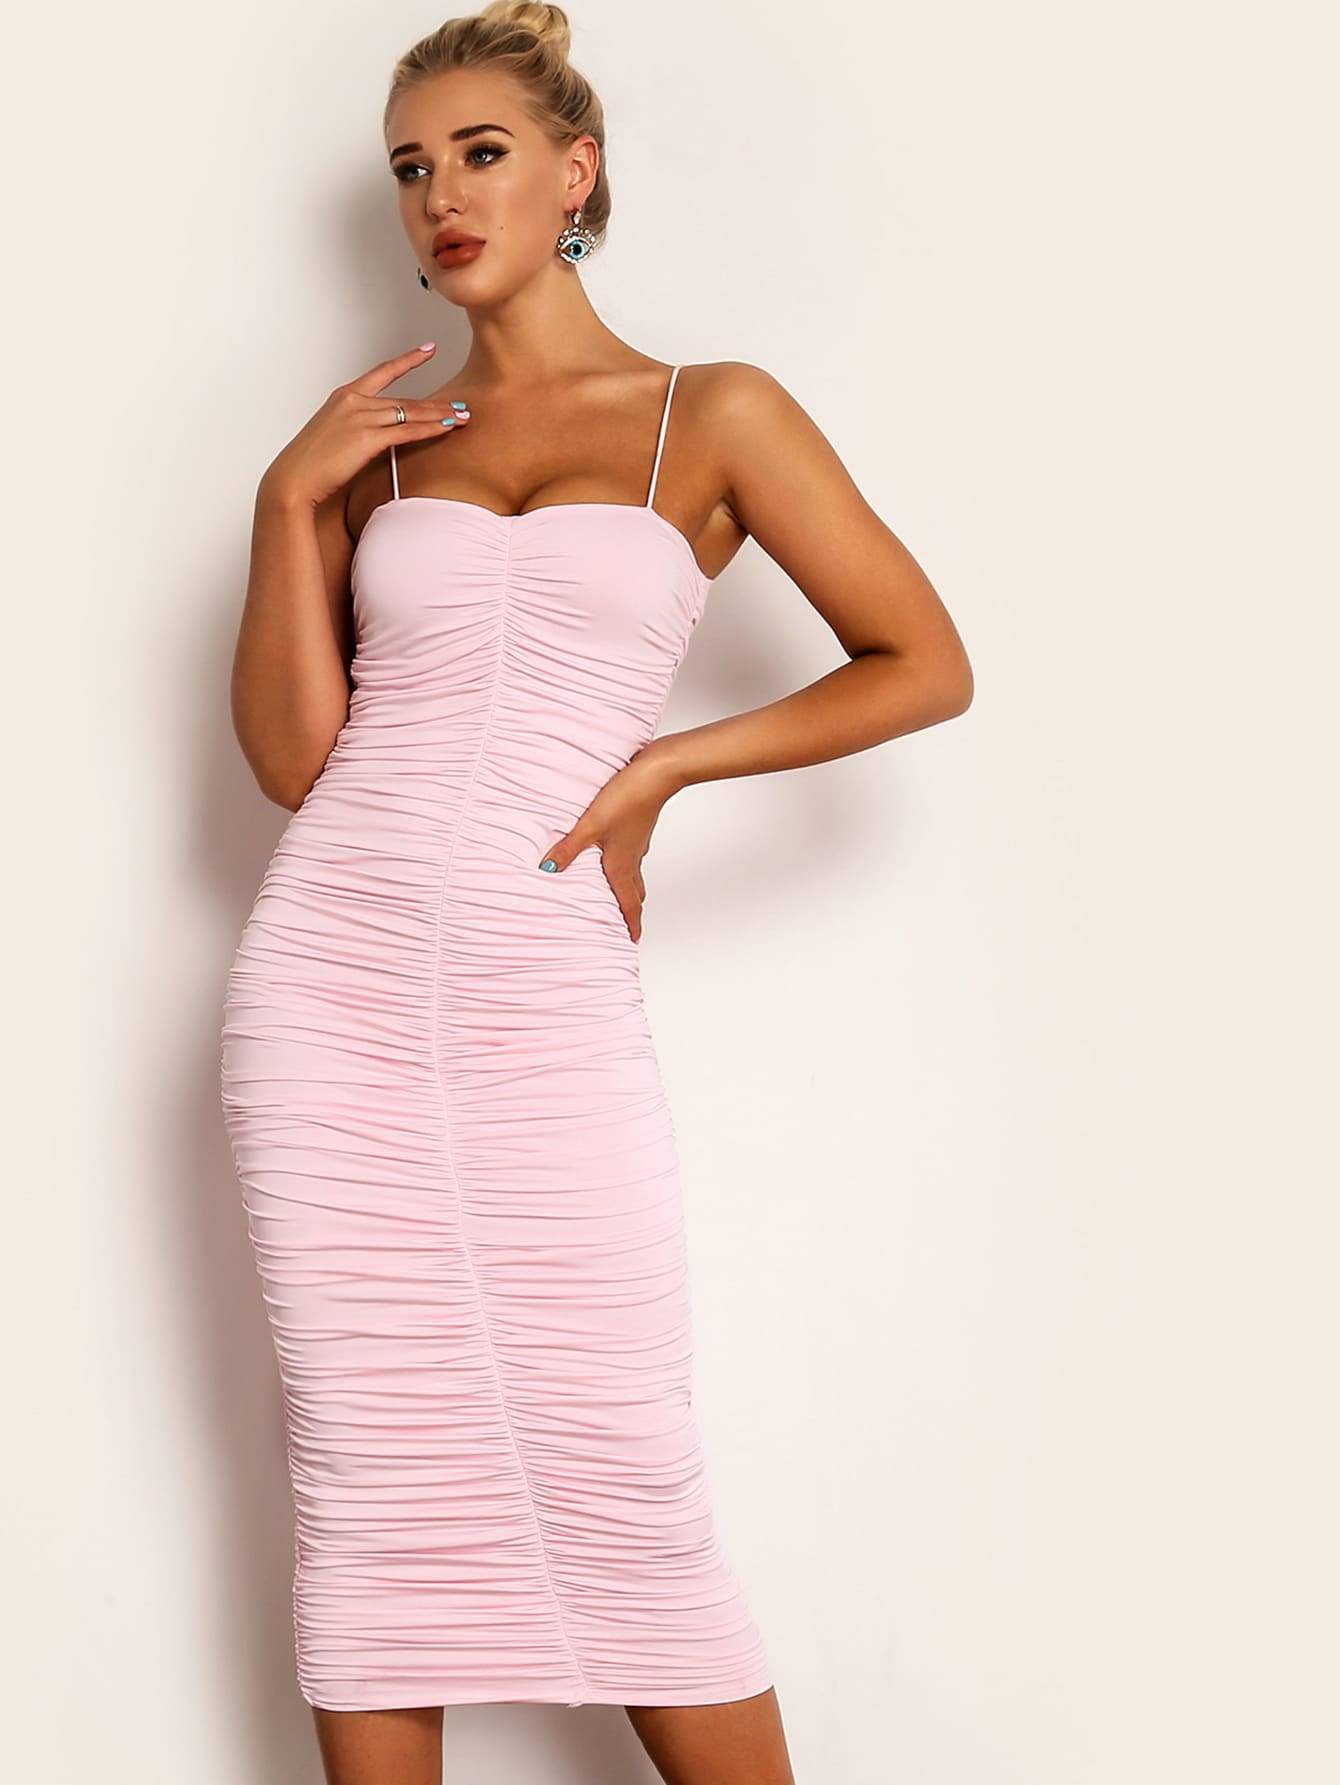 Pastel Pink Spaghetti Strap Sleeveless Sweetheart Neck Ruched Cami Pencil Dress